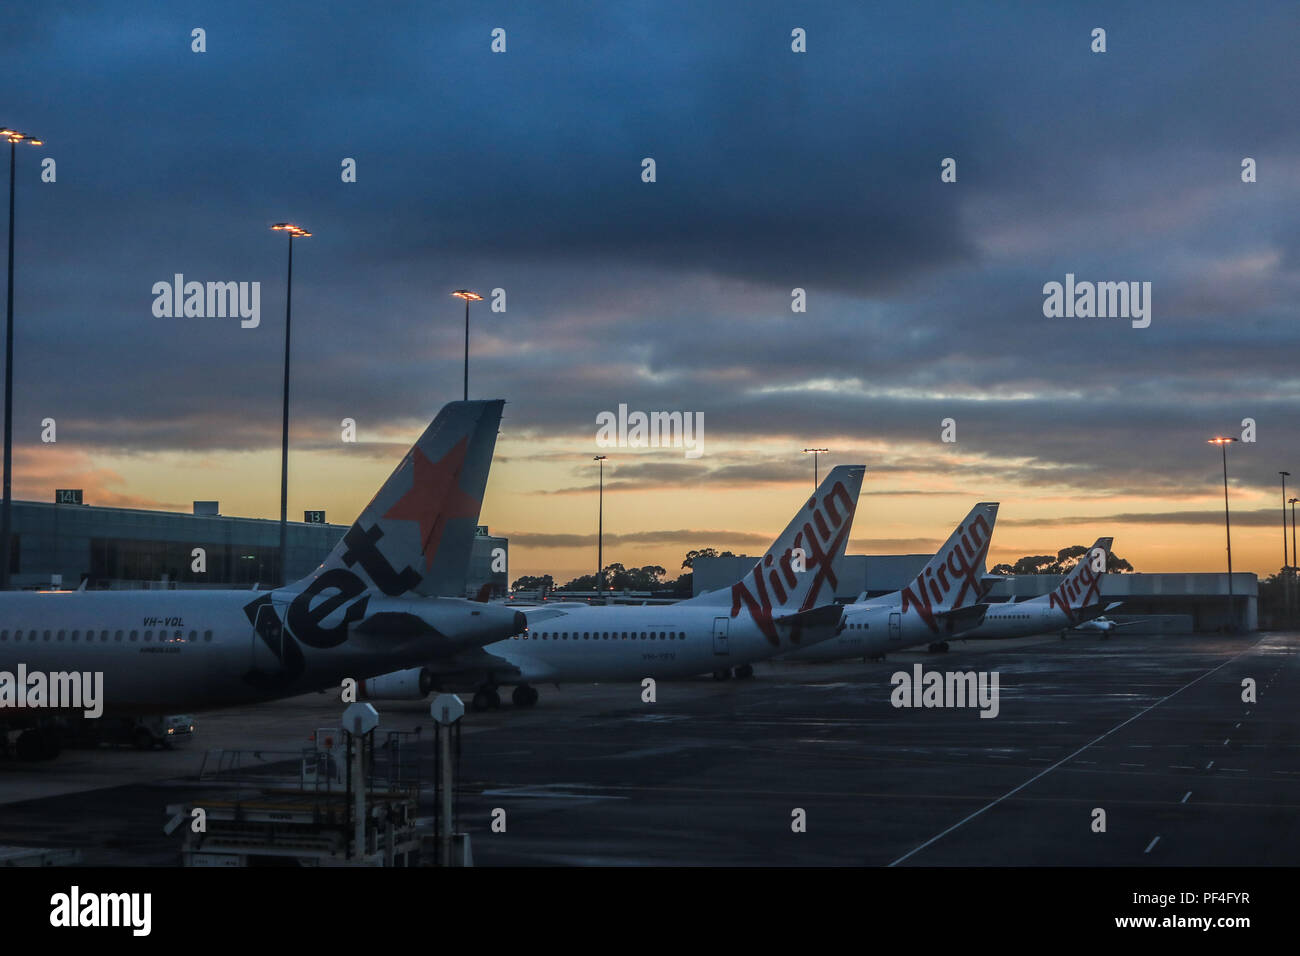 Adelaide, Australia. 19 August 2018.  Jet Star and Virgin airplane tail fins are silhouetted against a dramatic sky during colourful sunrise at Adelaide International Airport Australia Stock Photo